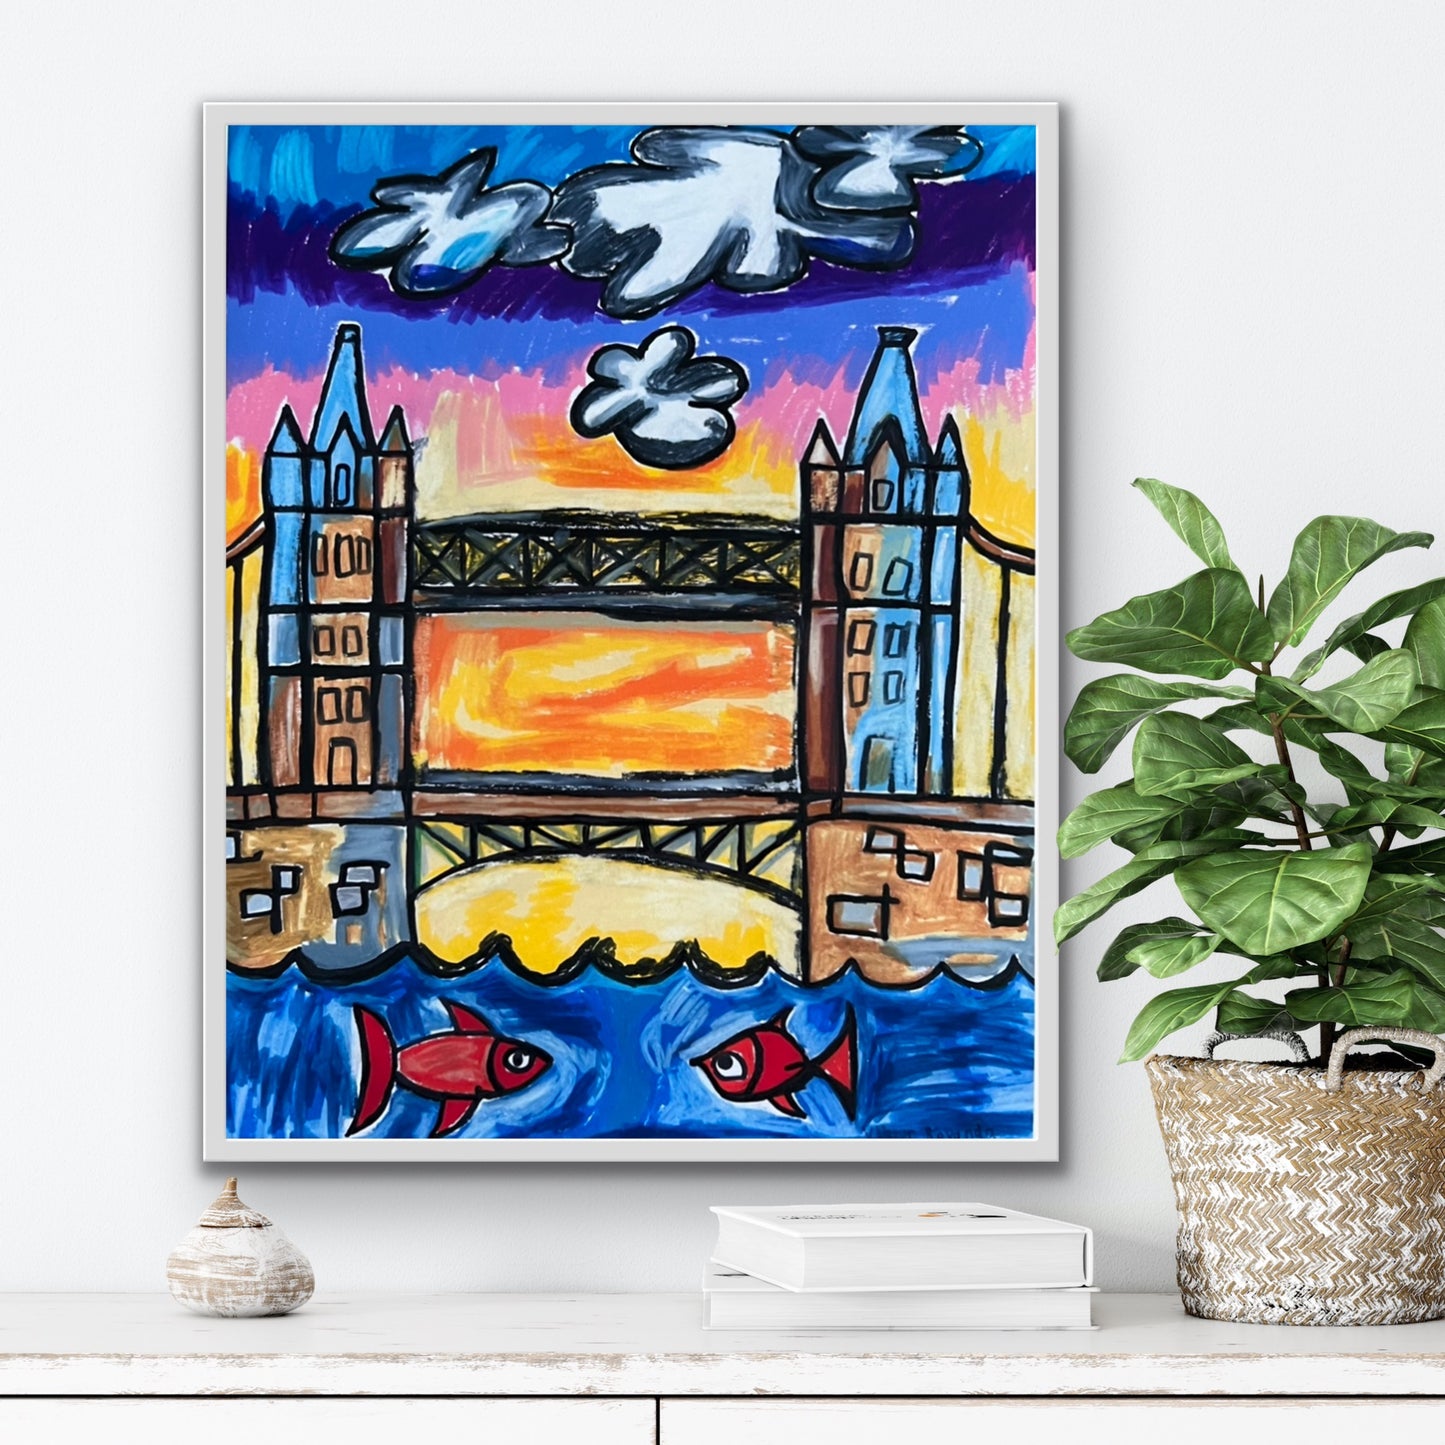 London (bridge) - Stretched Canvas Print in more sizes